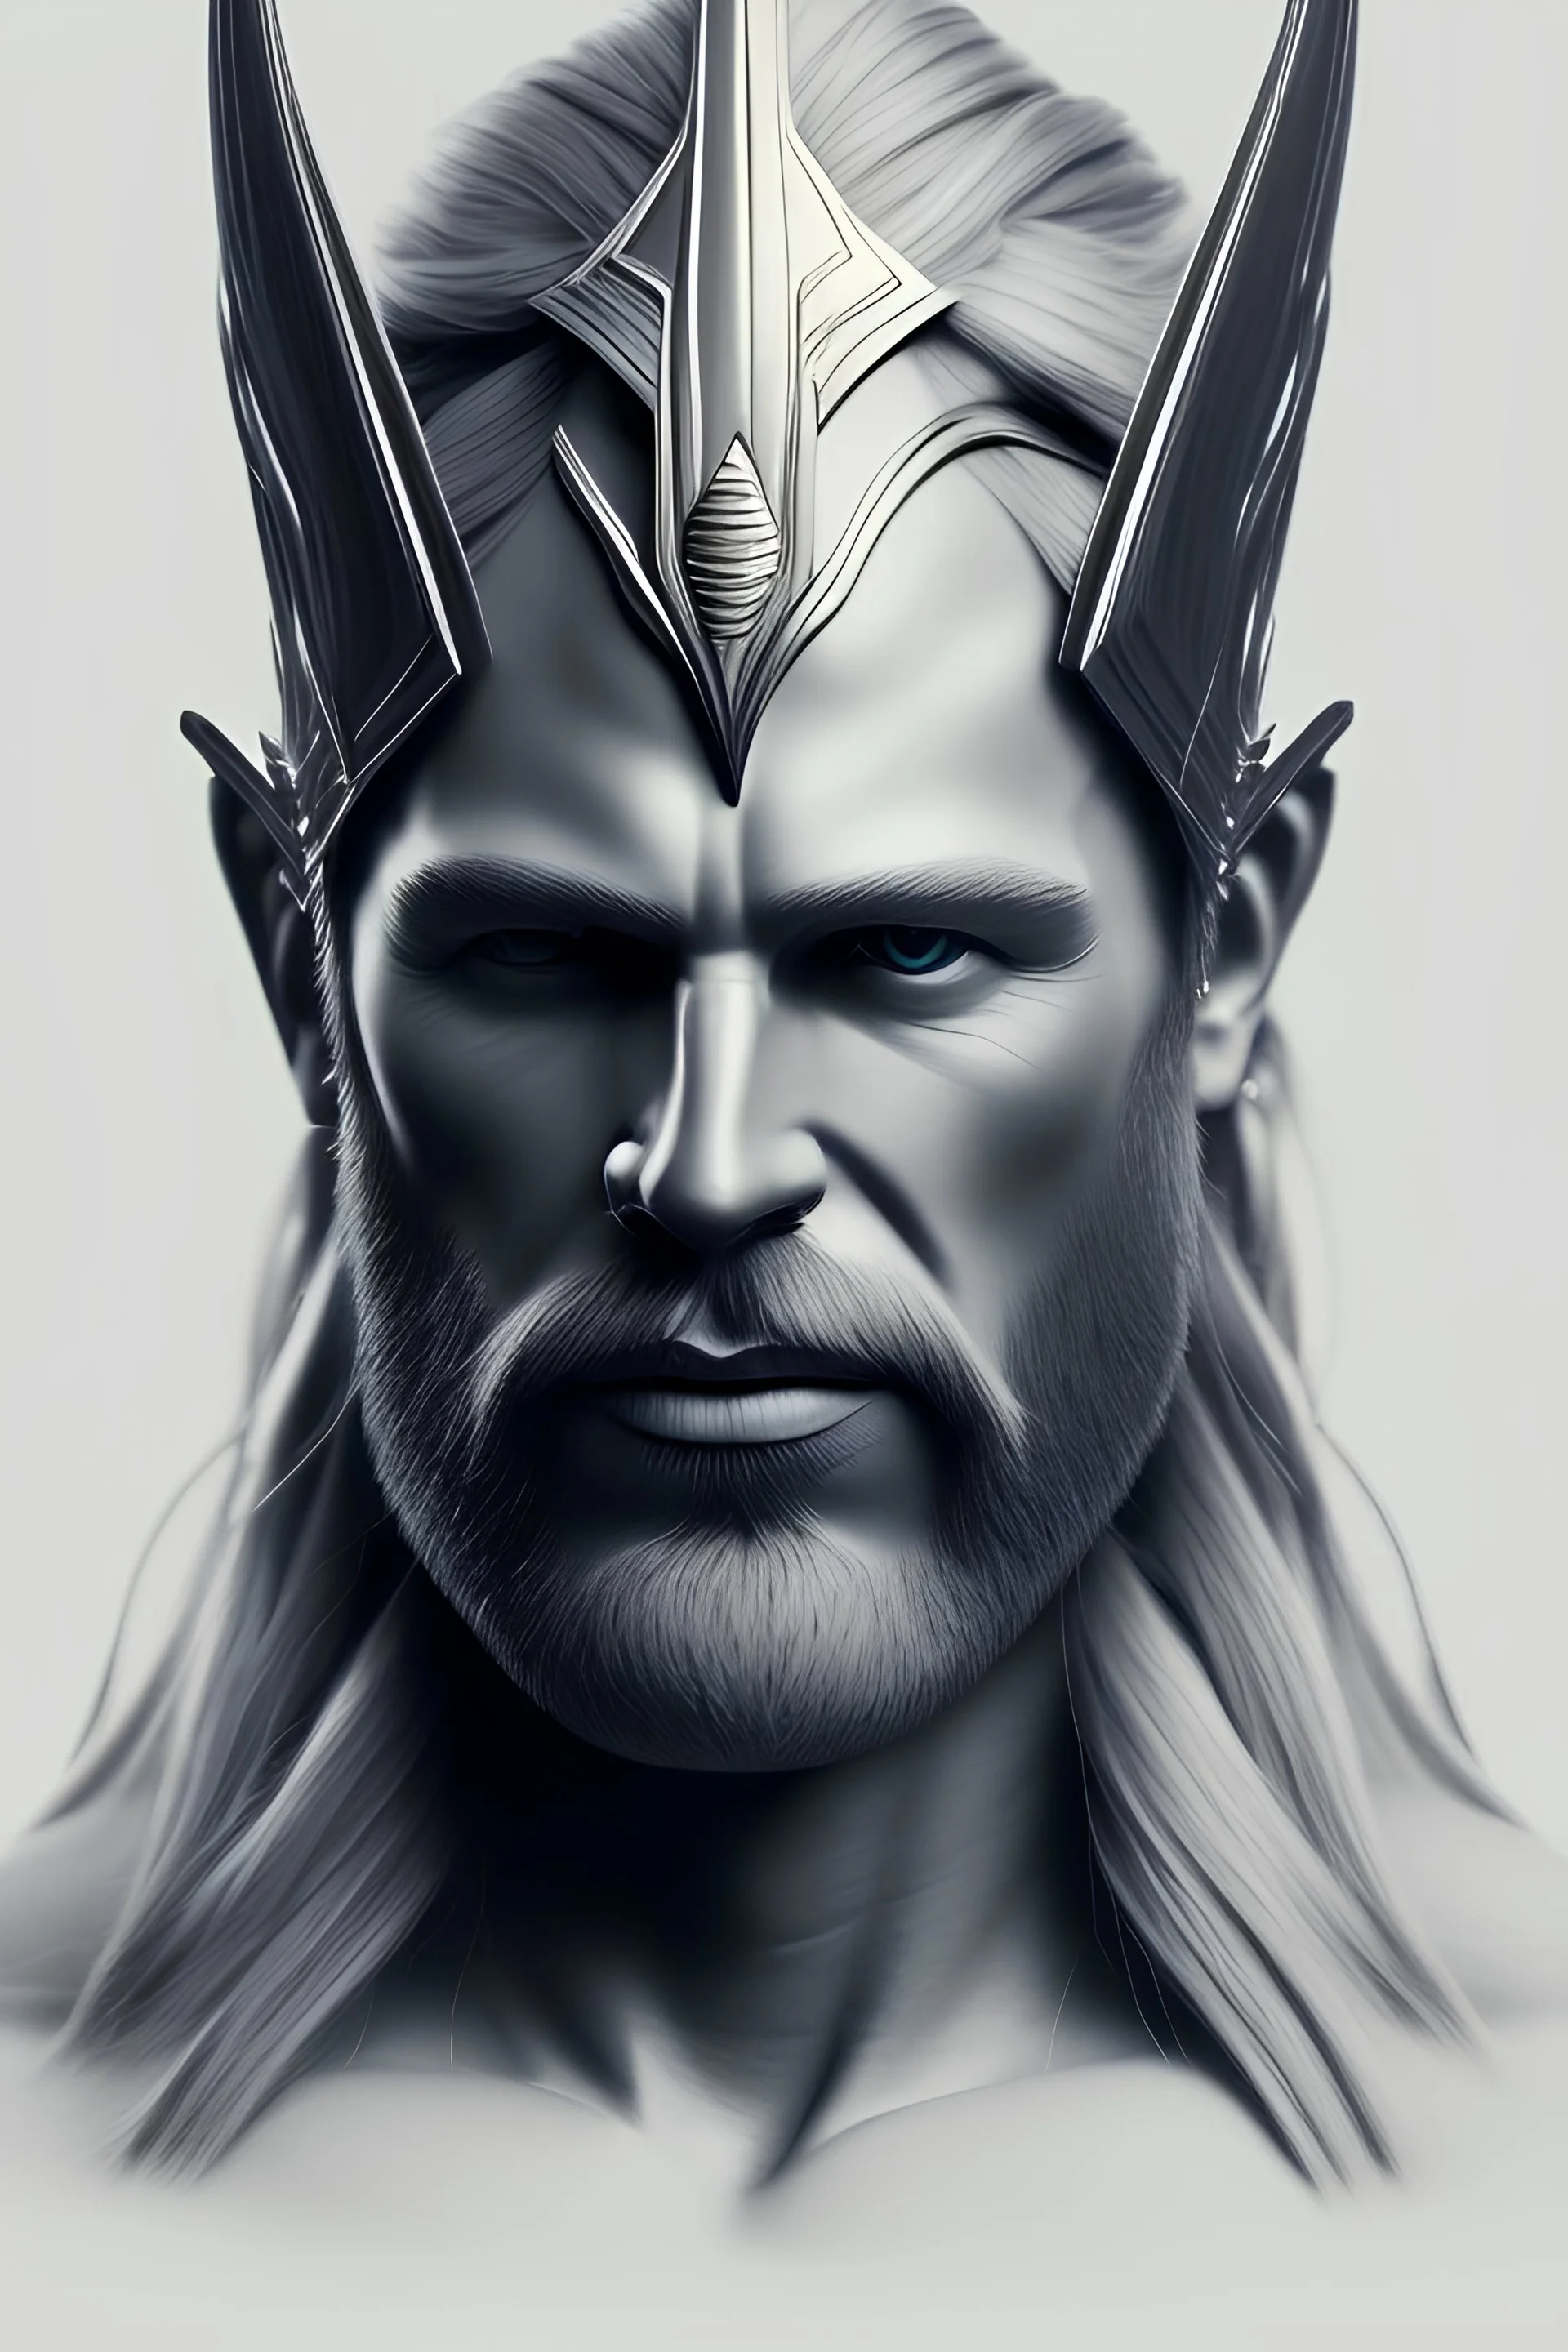 Thor Drawing | Fine art portraiture, Celebrity drawings, Thor drawing